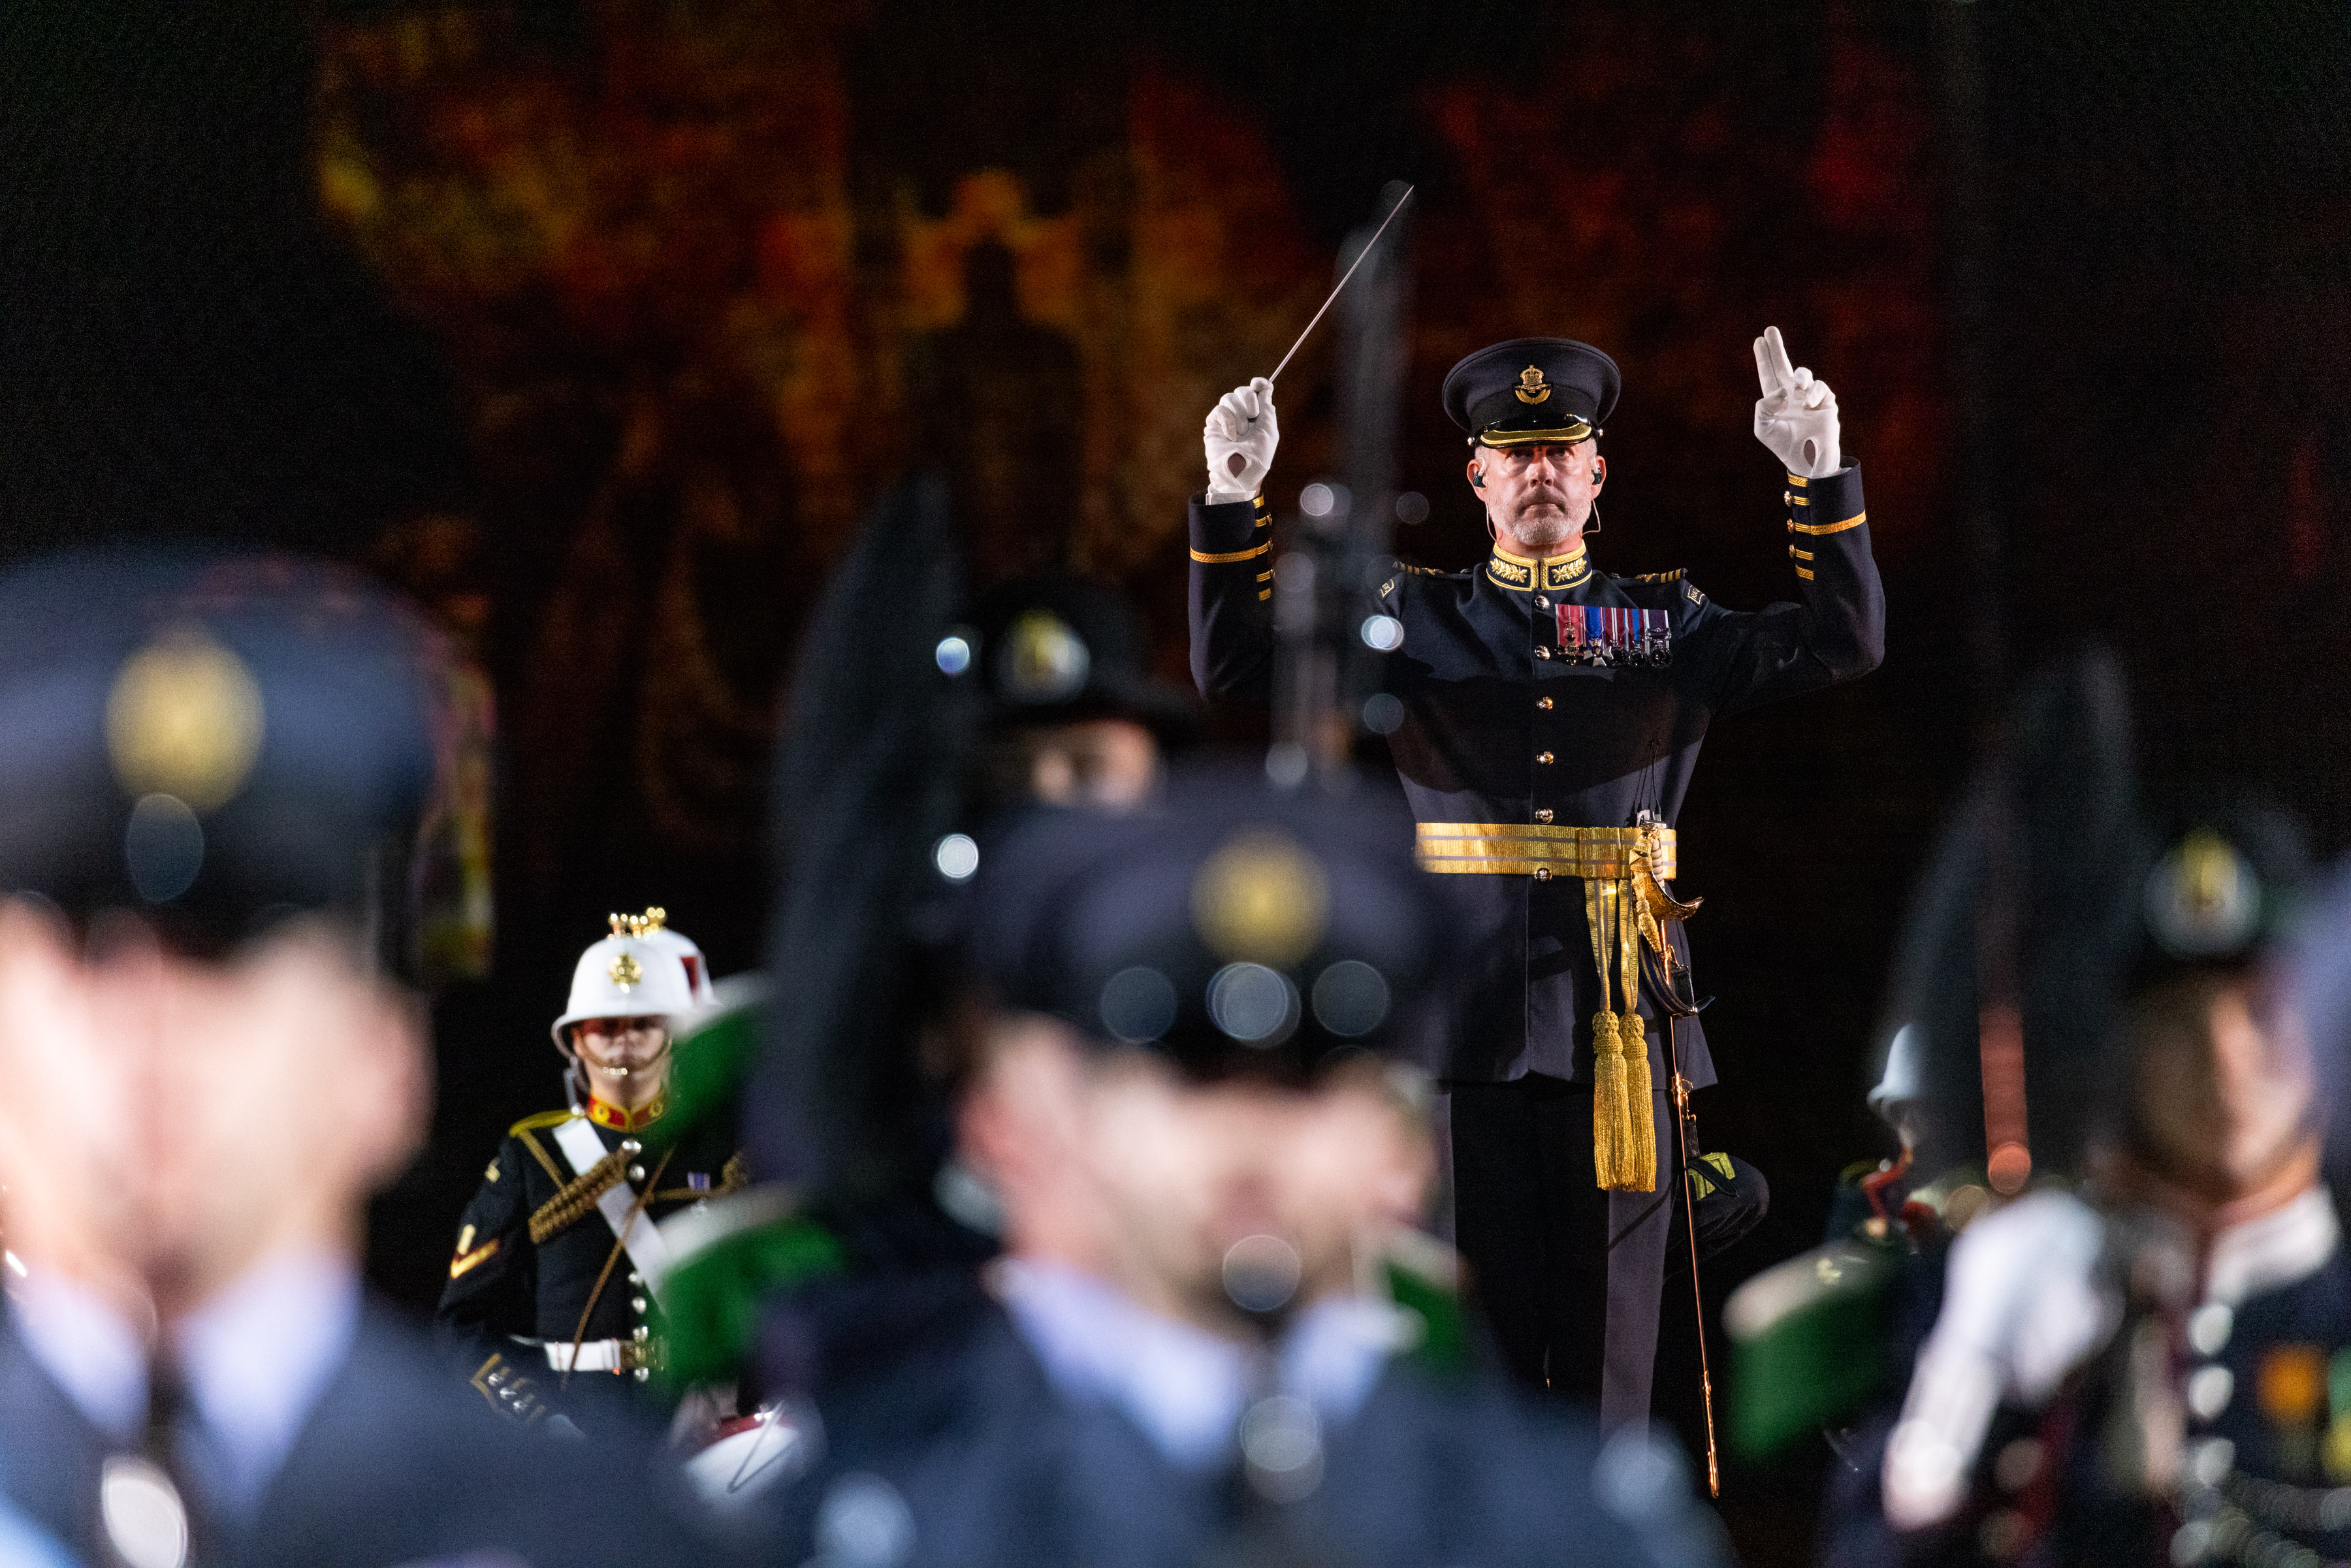 Wing Commander Piers Morrell conducting at The Royal Edinburgh Military Tattoo